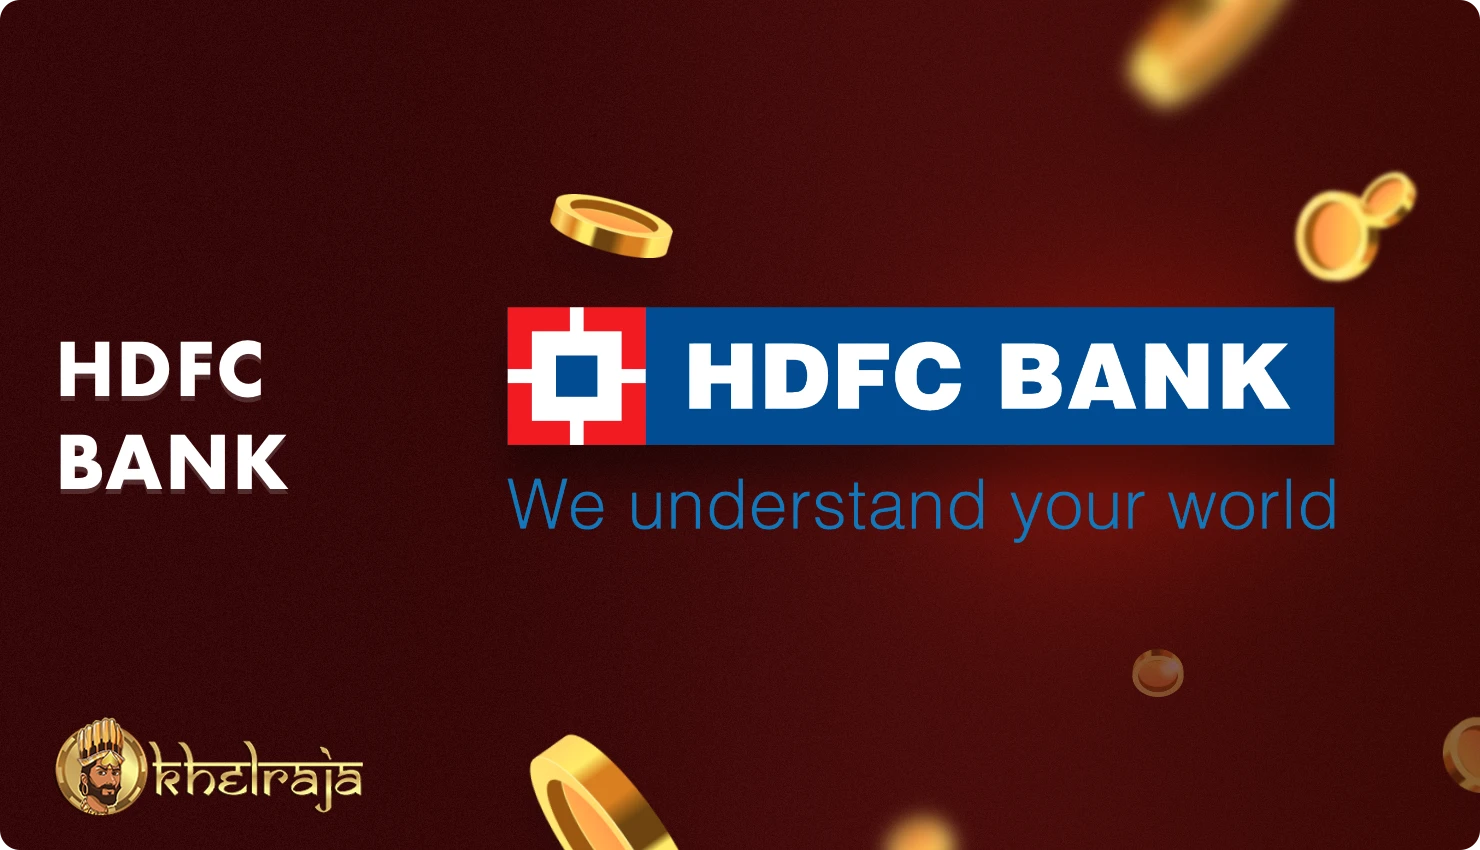 Khelraja provides an opportunity to deposit and withdraw funds through HDFC Bank